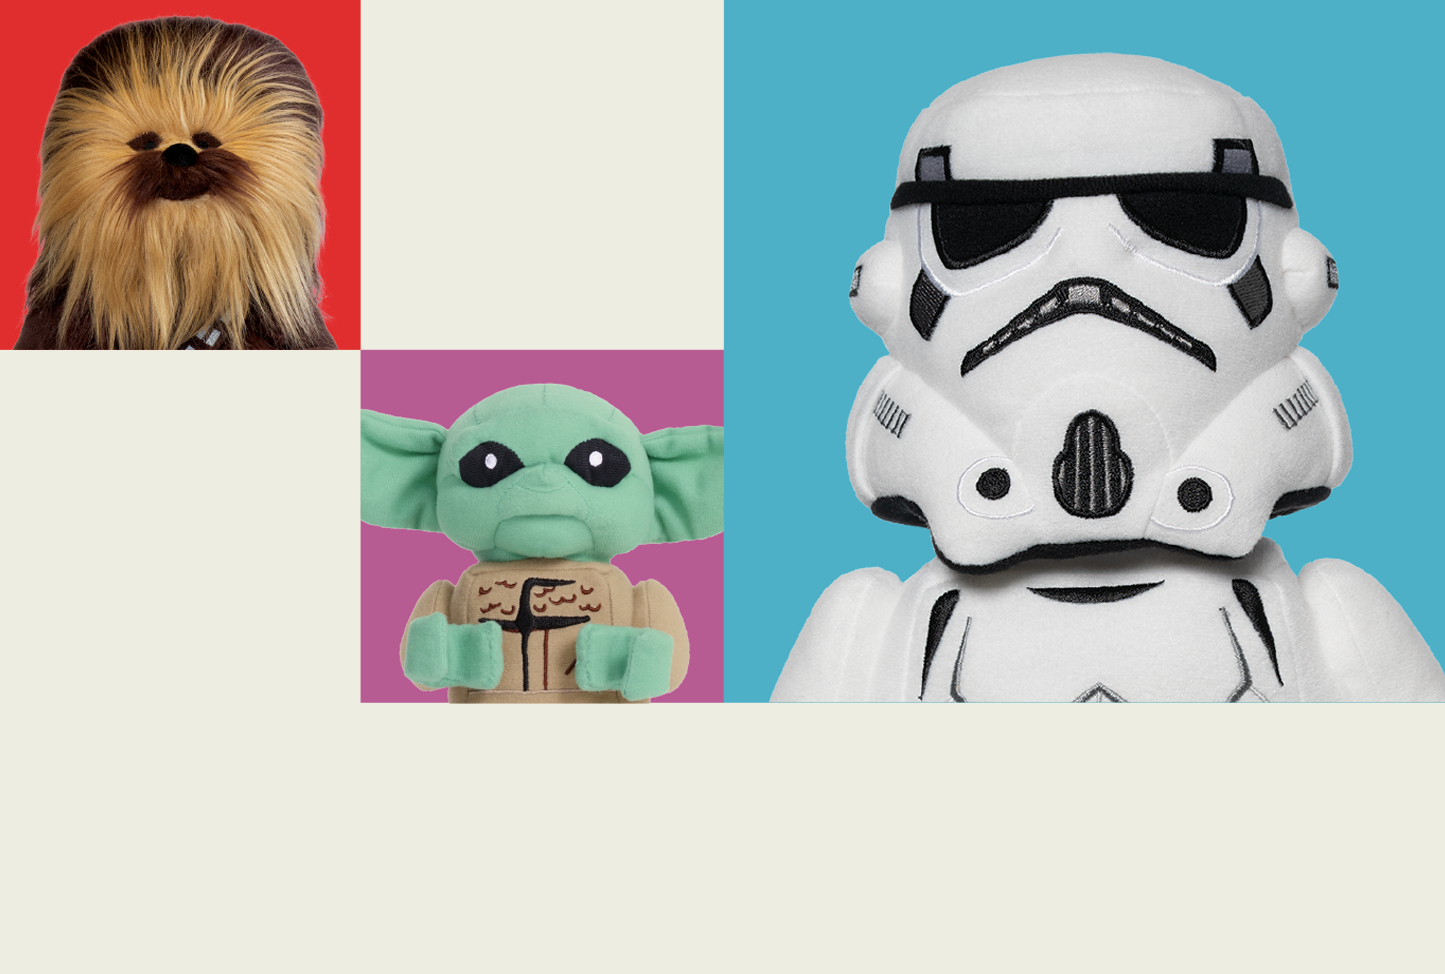 LEGO Star Wars characters on colored backgrounds